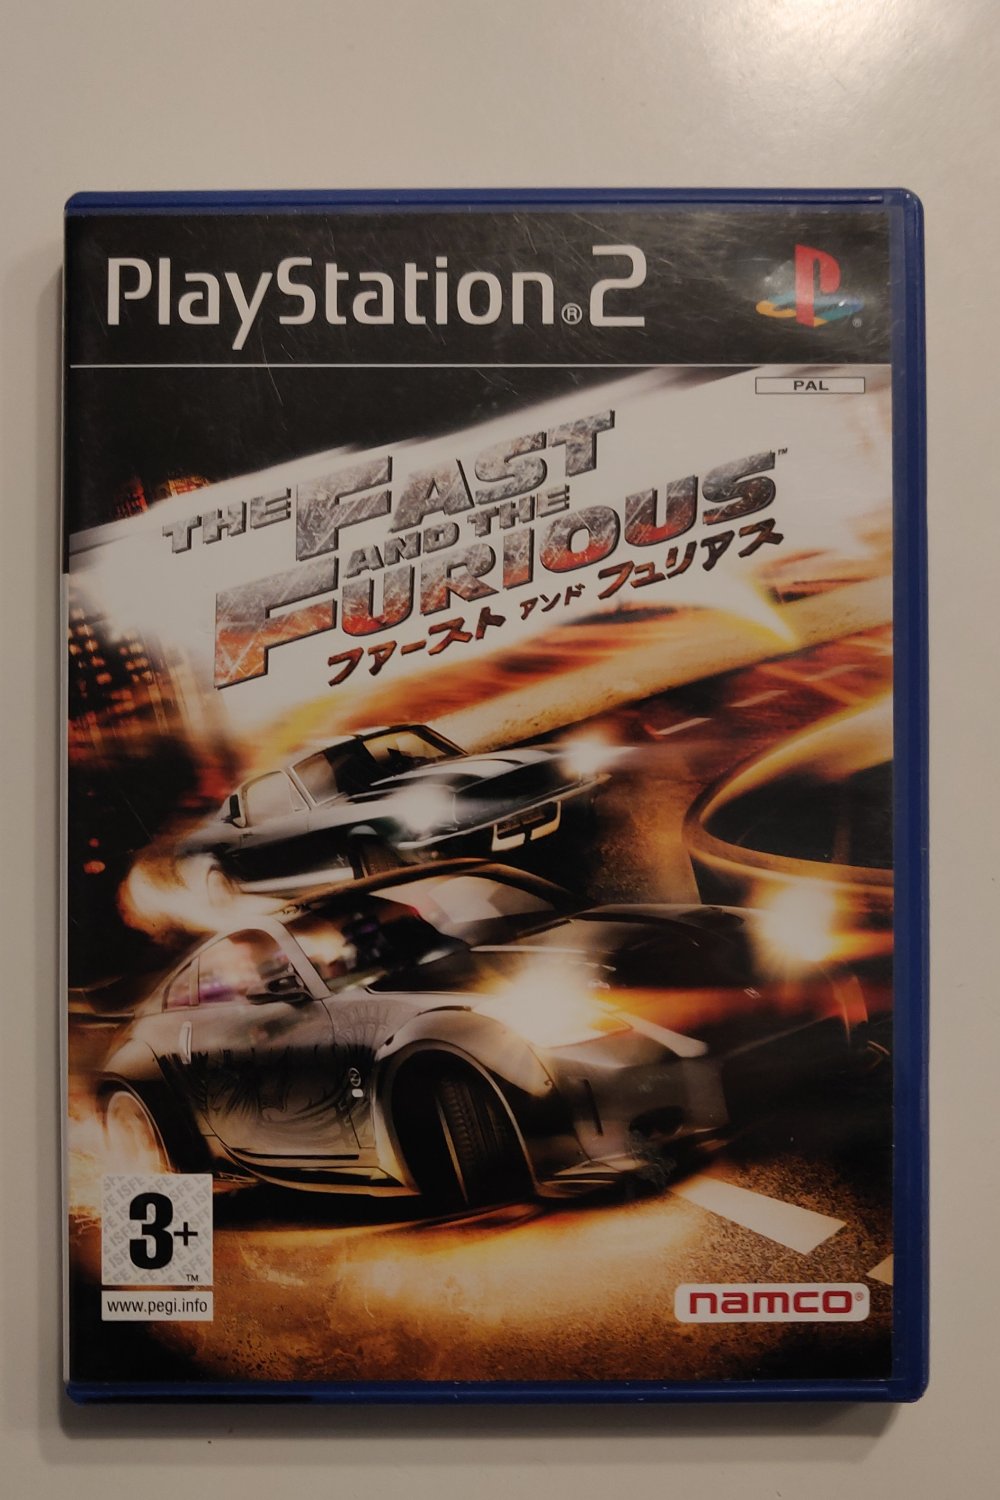 The Fast and the Furious (Playstation 2 PAL) (CIB)